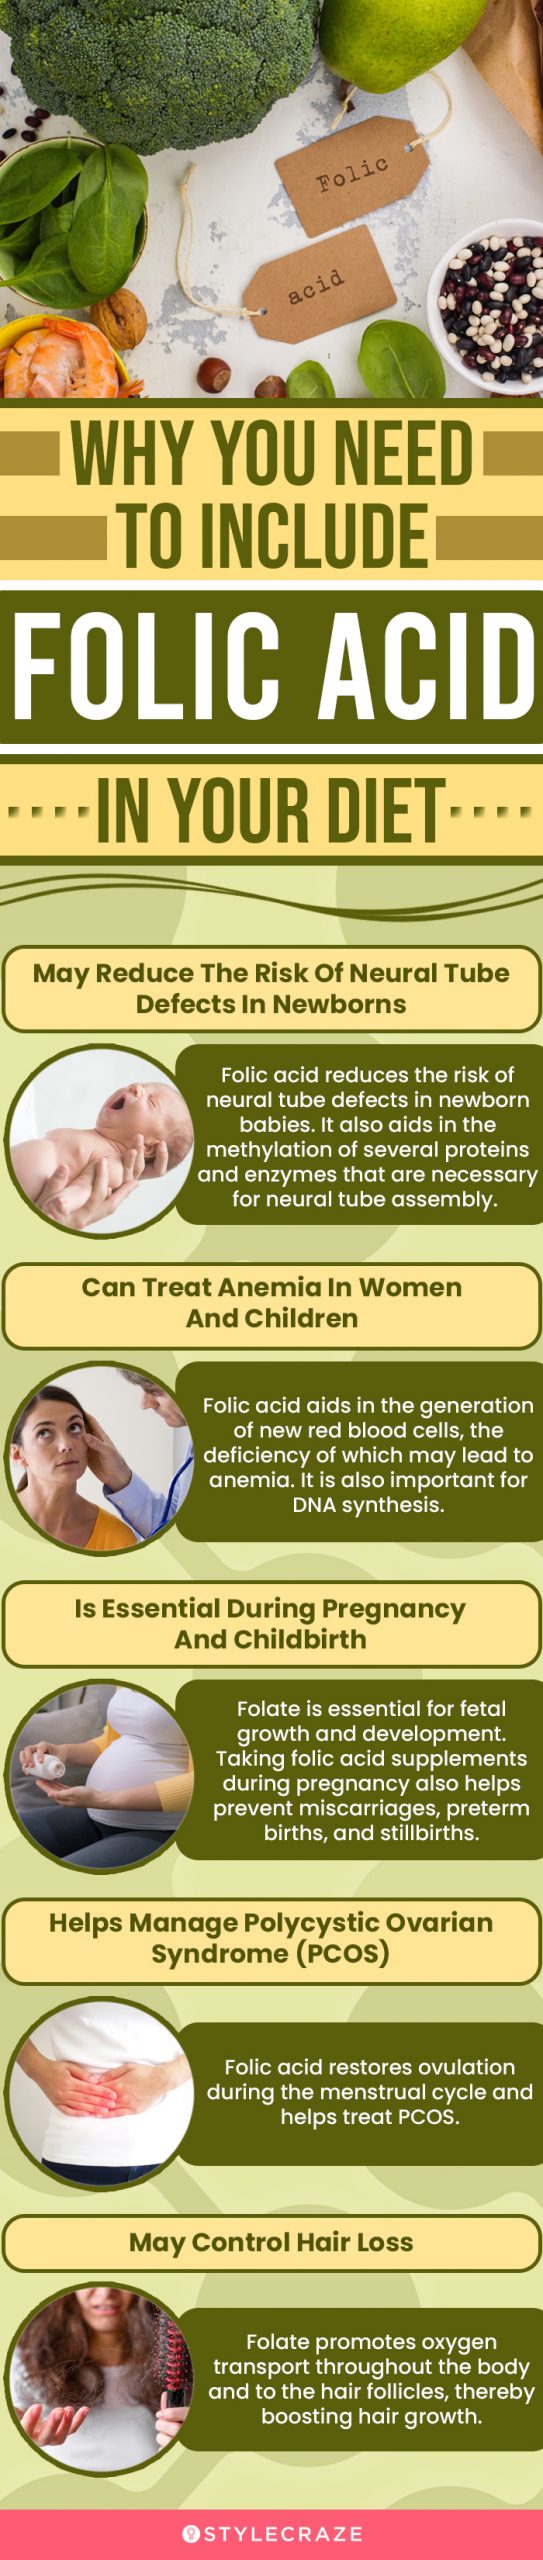 why you need to include folic acid in your diet (infographic)